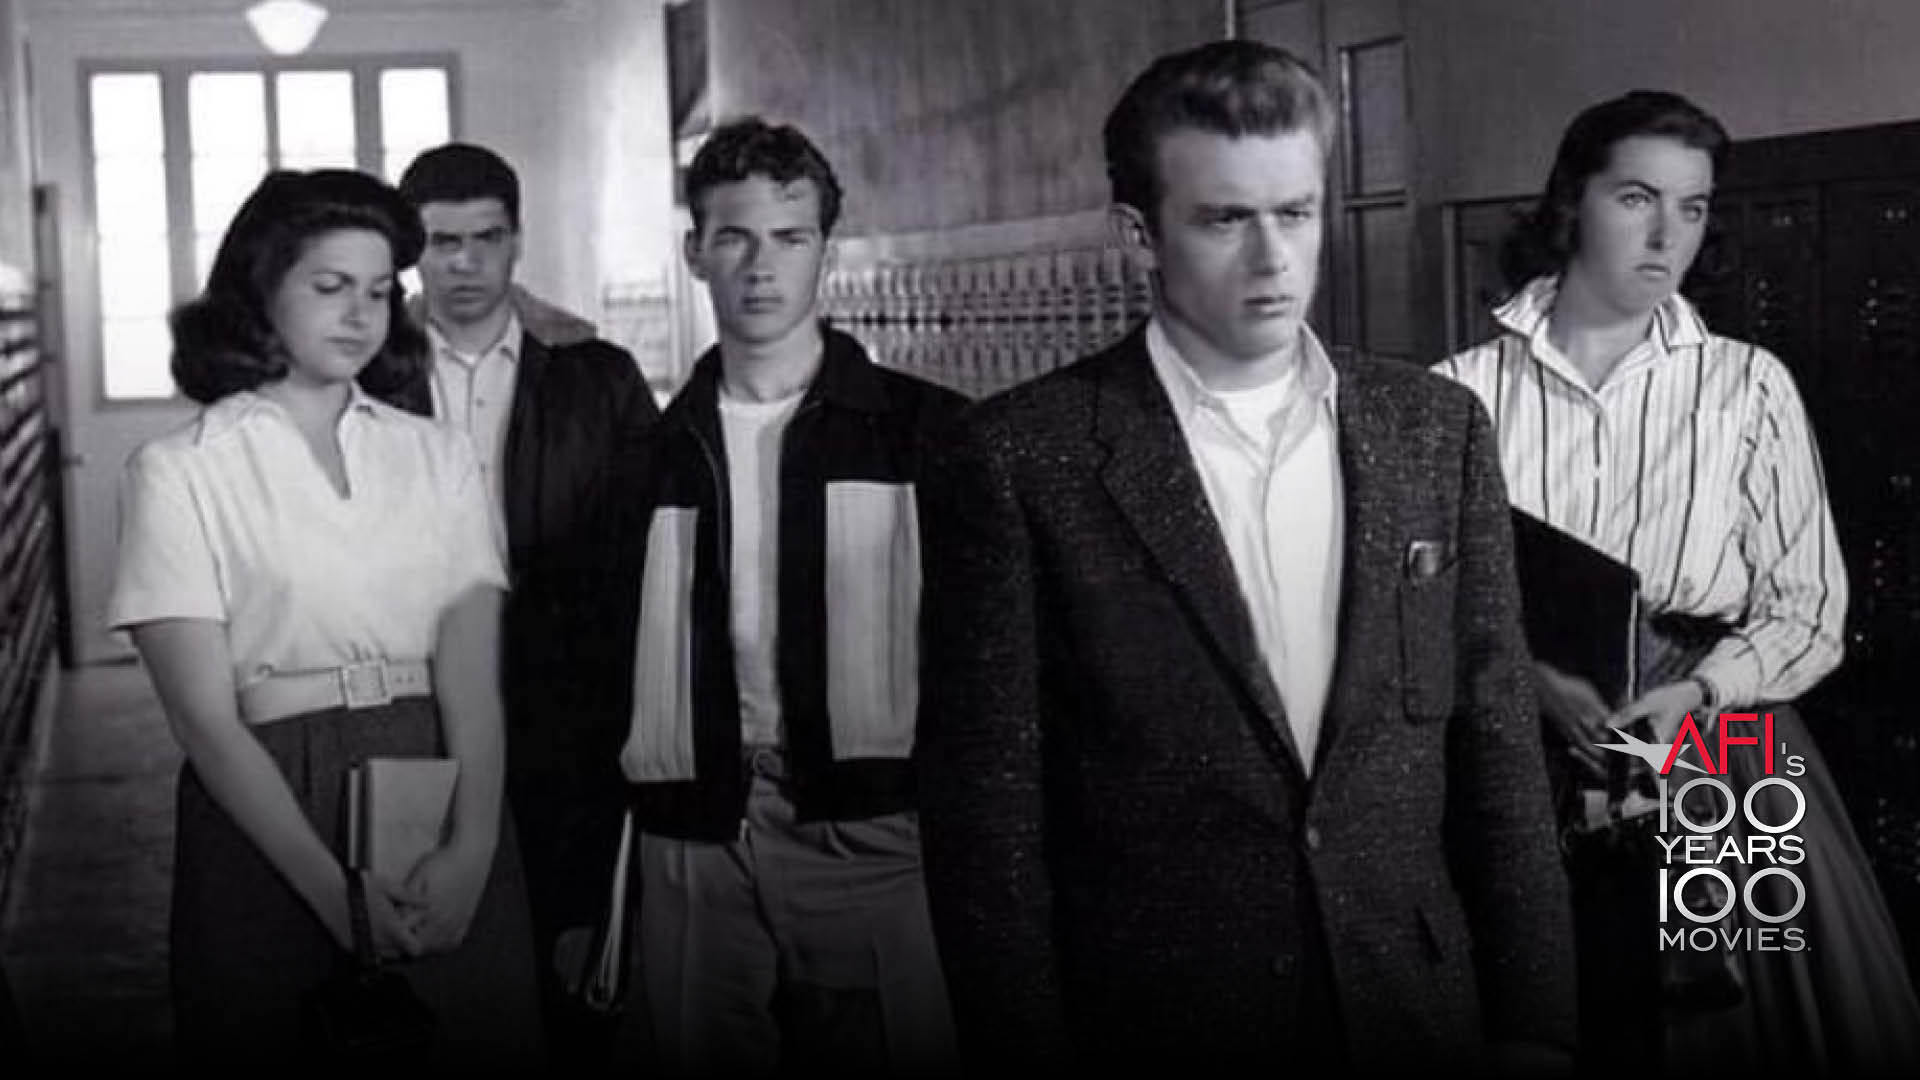 IMAGE FROM REBEL WITHOUT A CAUSE